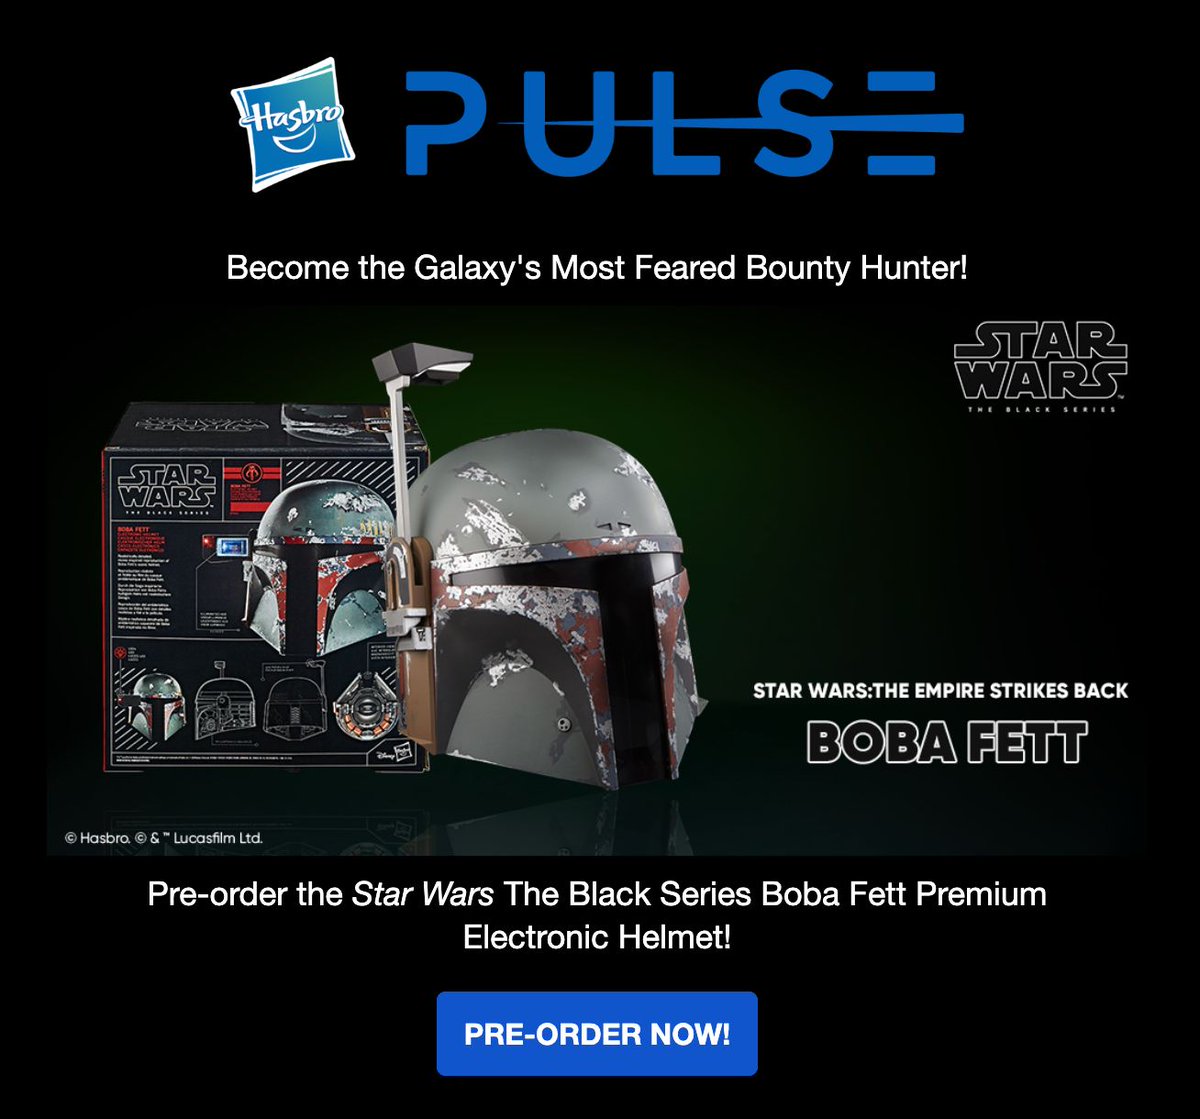 Hasbro just announced they're re-releasing their original Black Series #BobaFett helmet from 2020

Expected to ship in July, the re-pack is up for pre-order on their site: bobafett.club/tlqd3 

Like the 'Prototype' versionre-release, it might show up at other retailers too